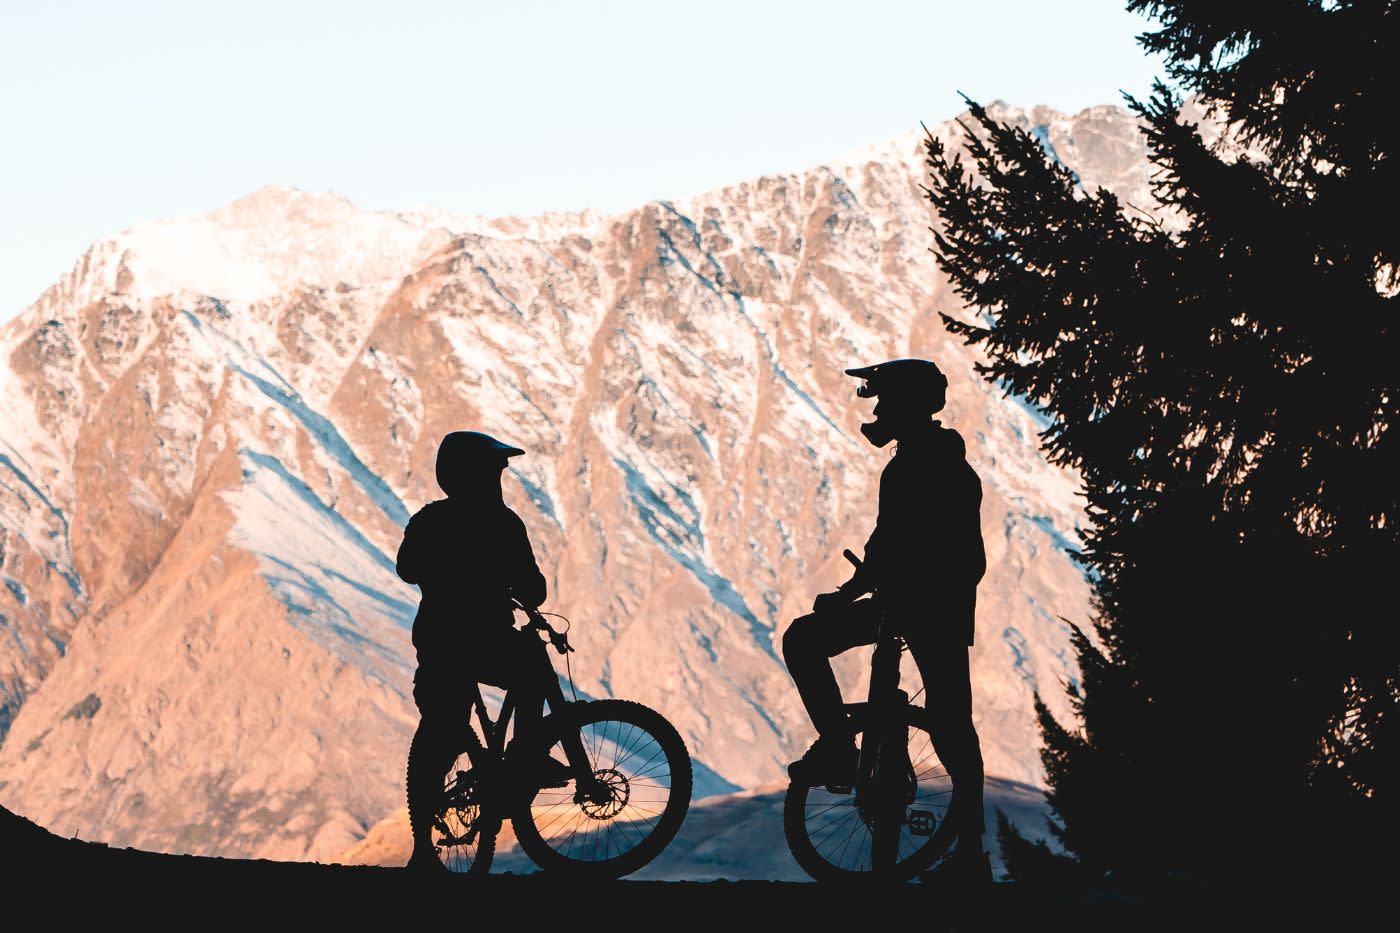 Mountain bikers pausing for a break next to The Remarkables mountain range in winter